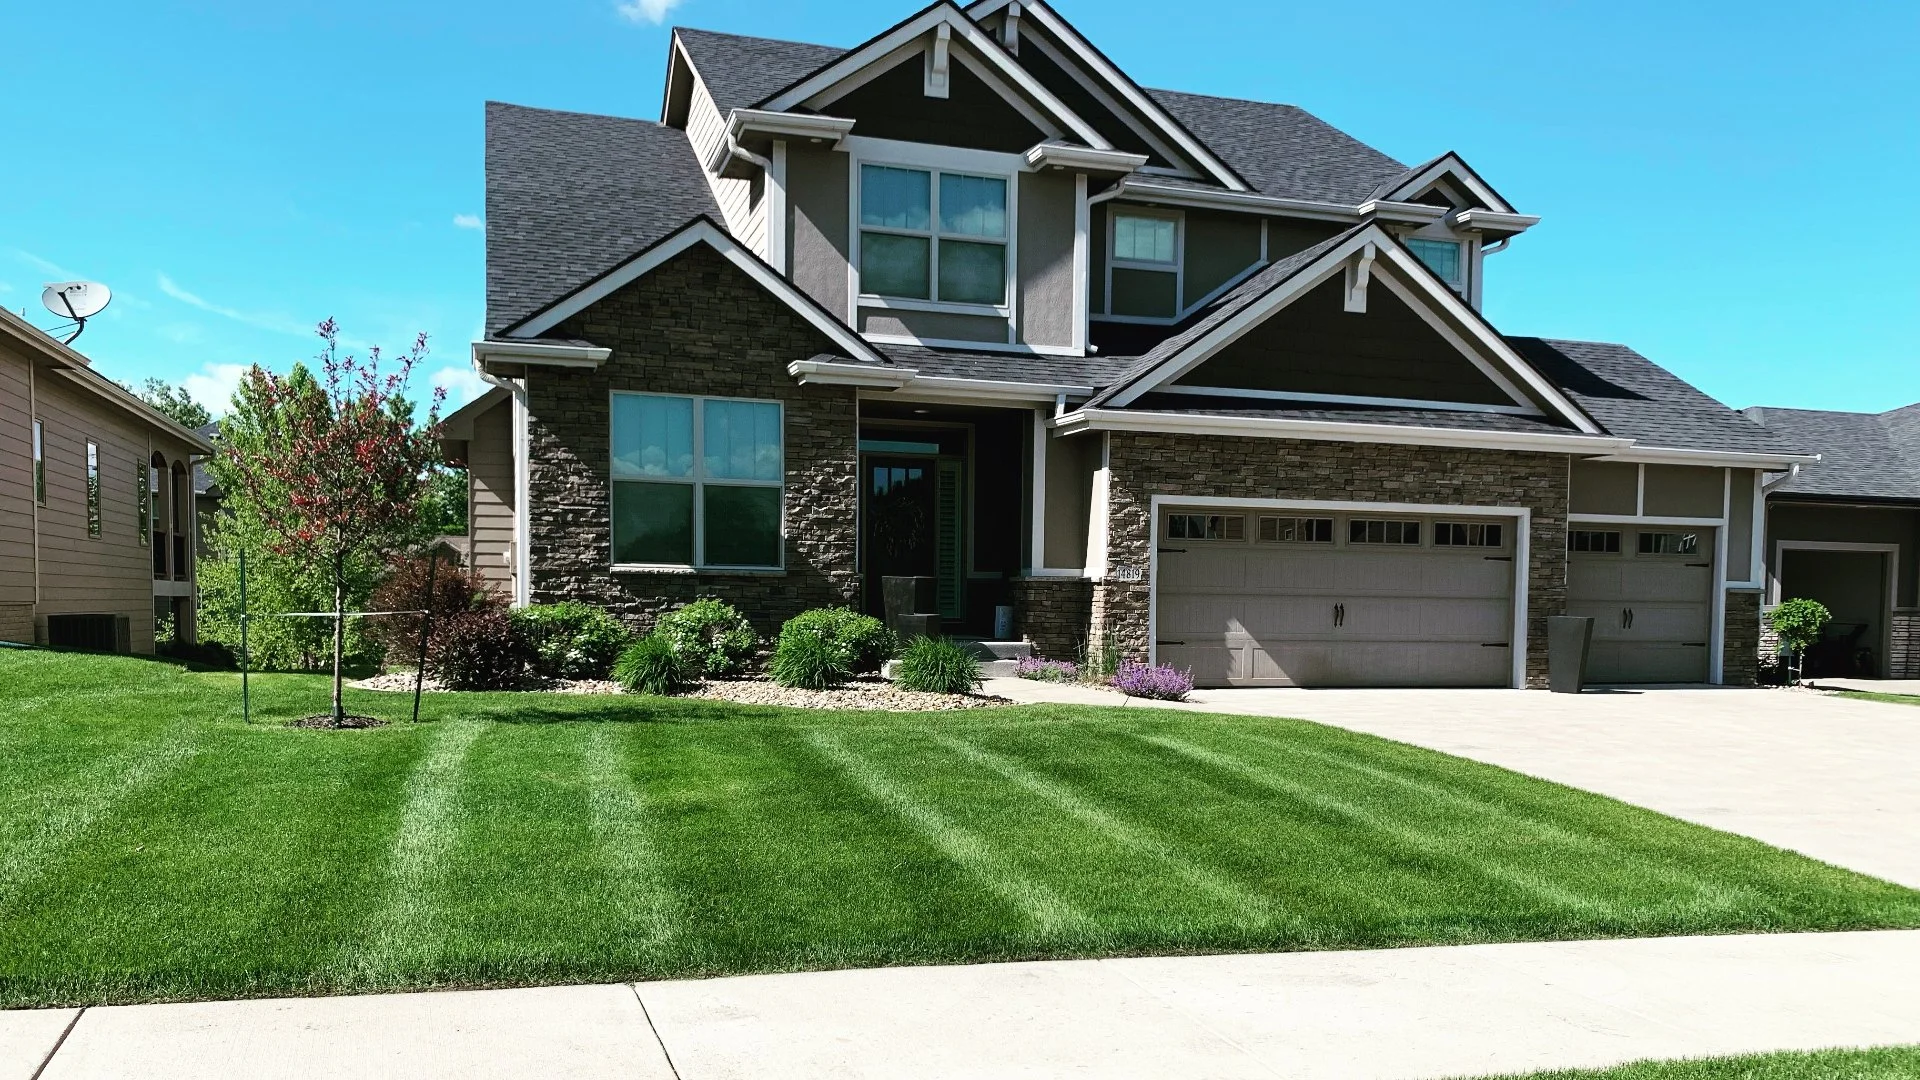 When Should You Fertilize Your Grass in Iowa in the Spring?